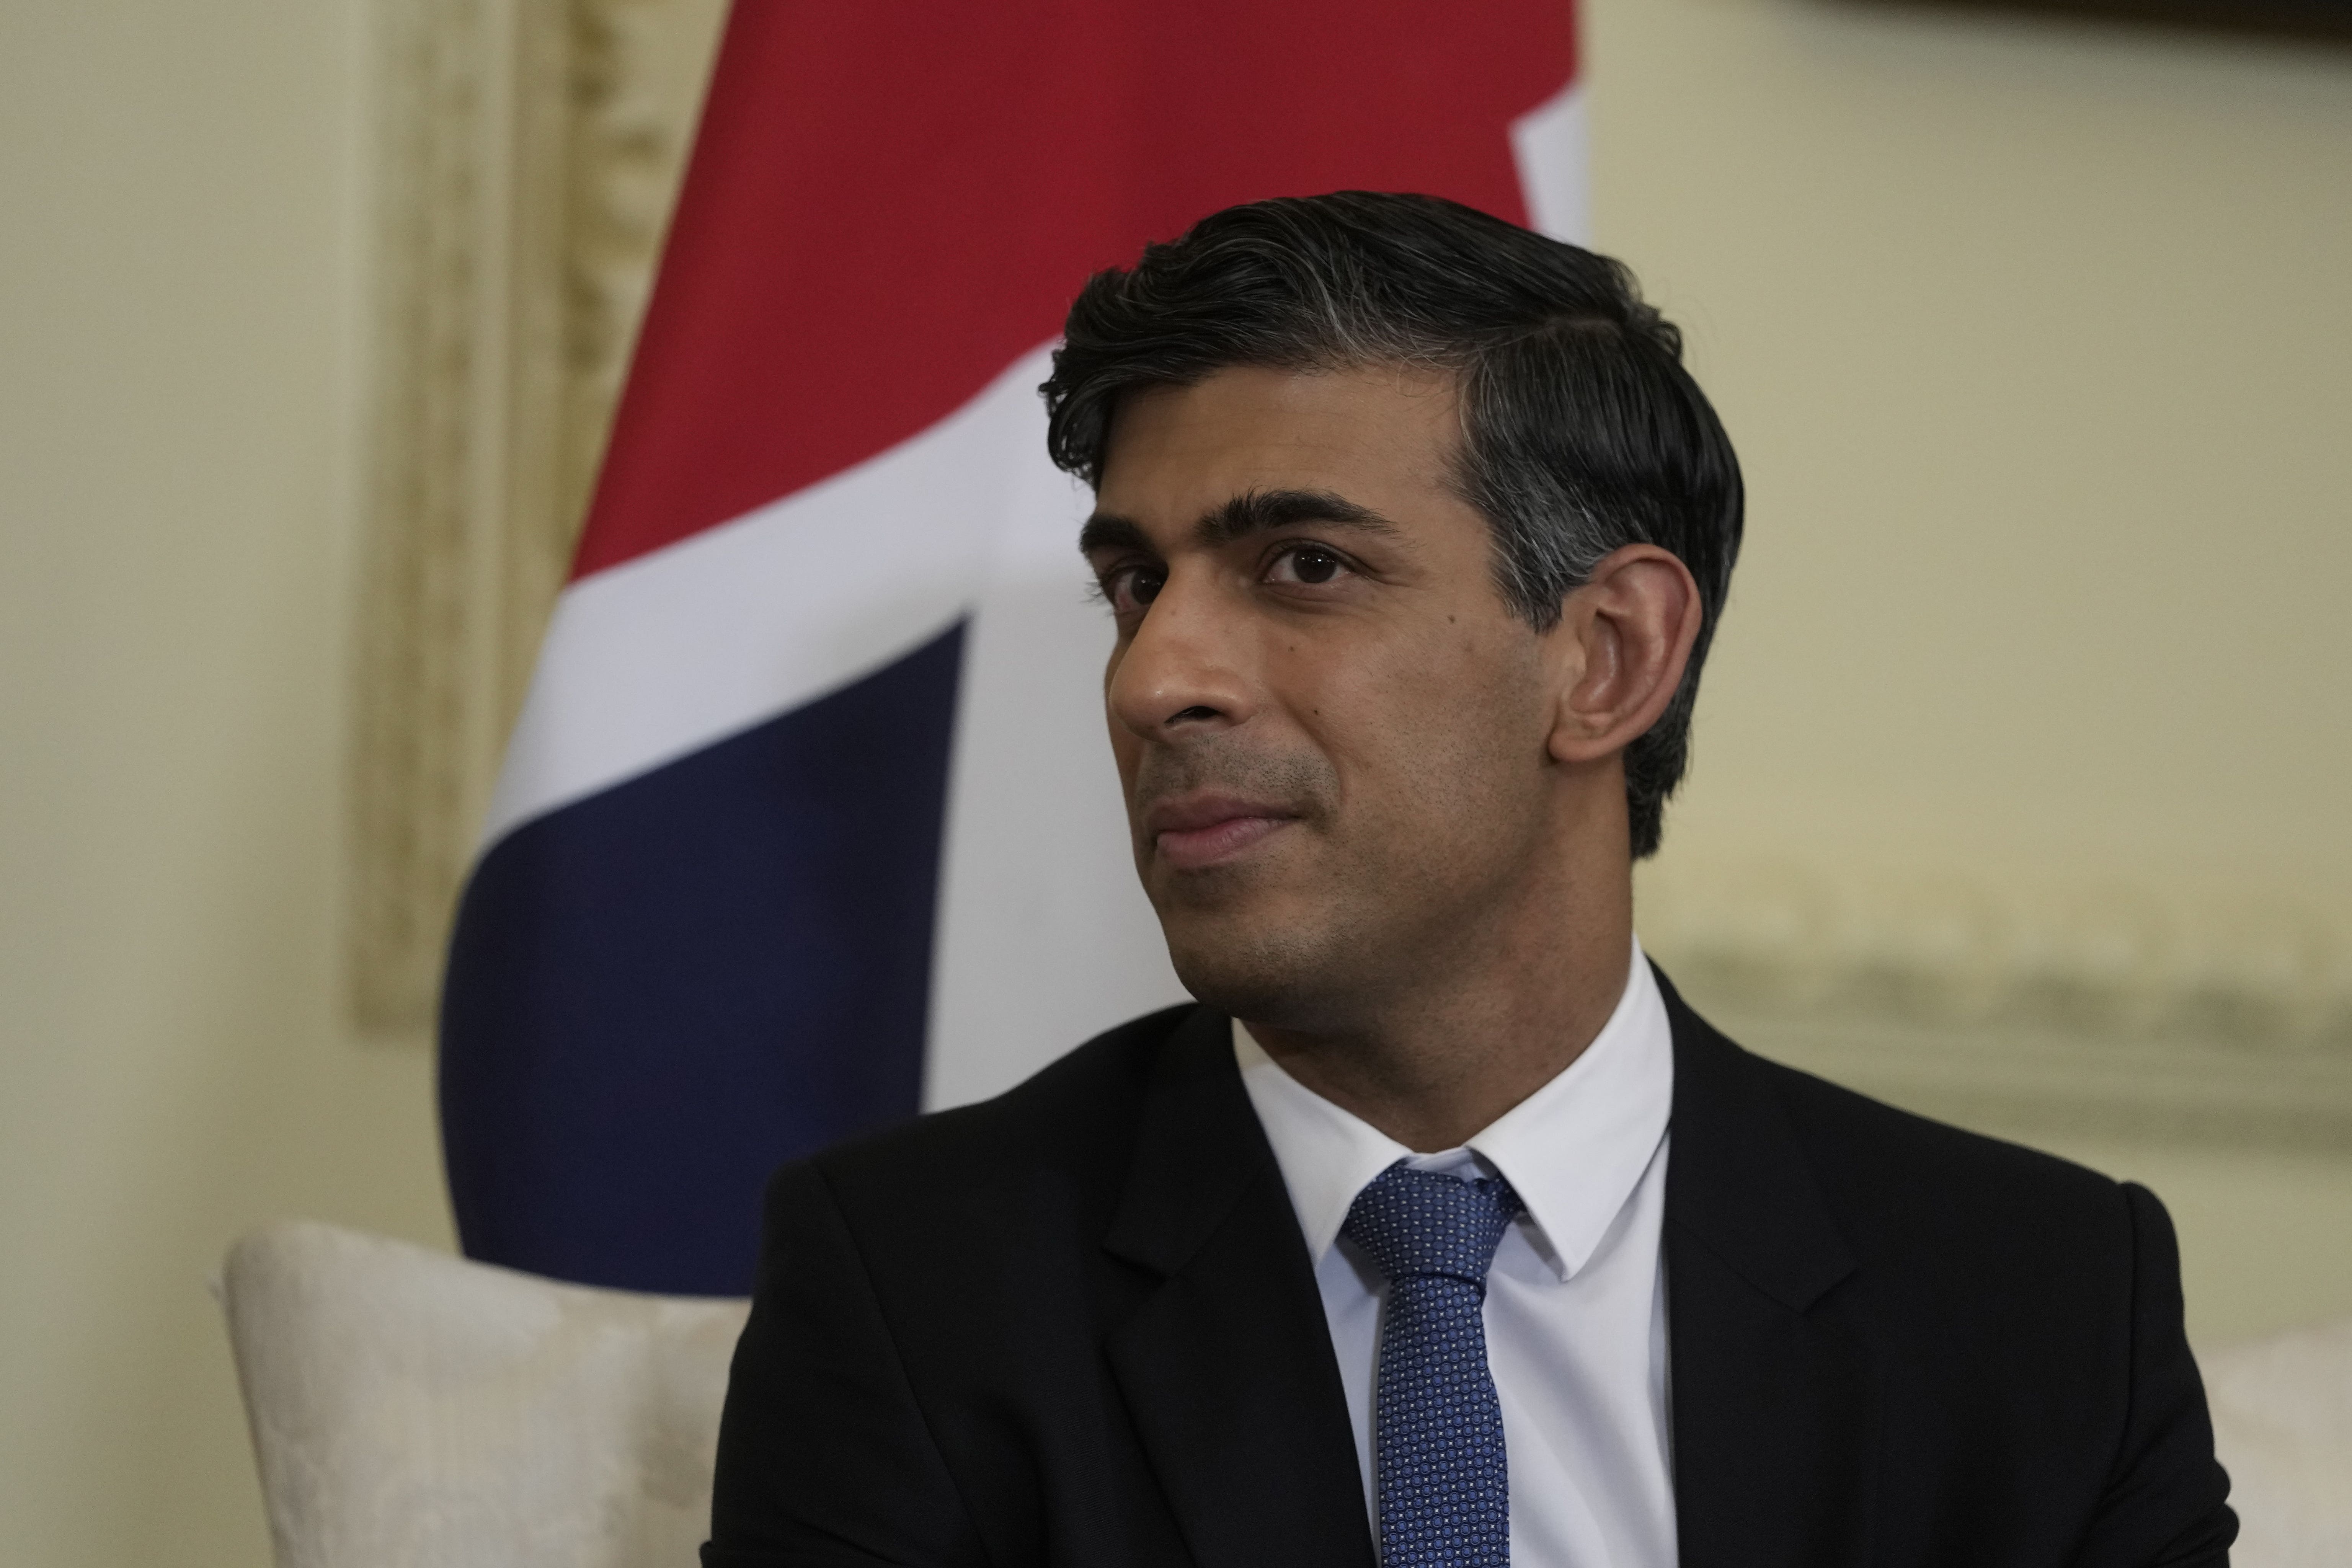 Prime minister Rishi Sunak decided against meeting his Greek counterpart after he spoke publicly about wanting the return of the Elgin Marbles